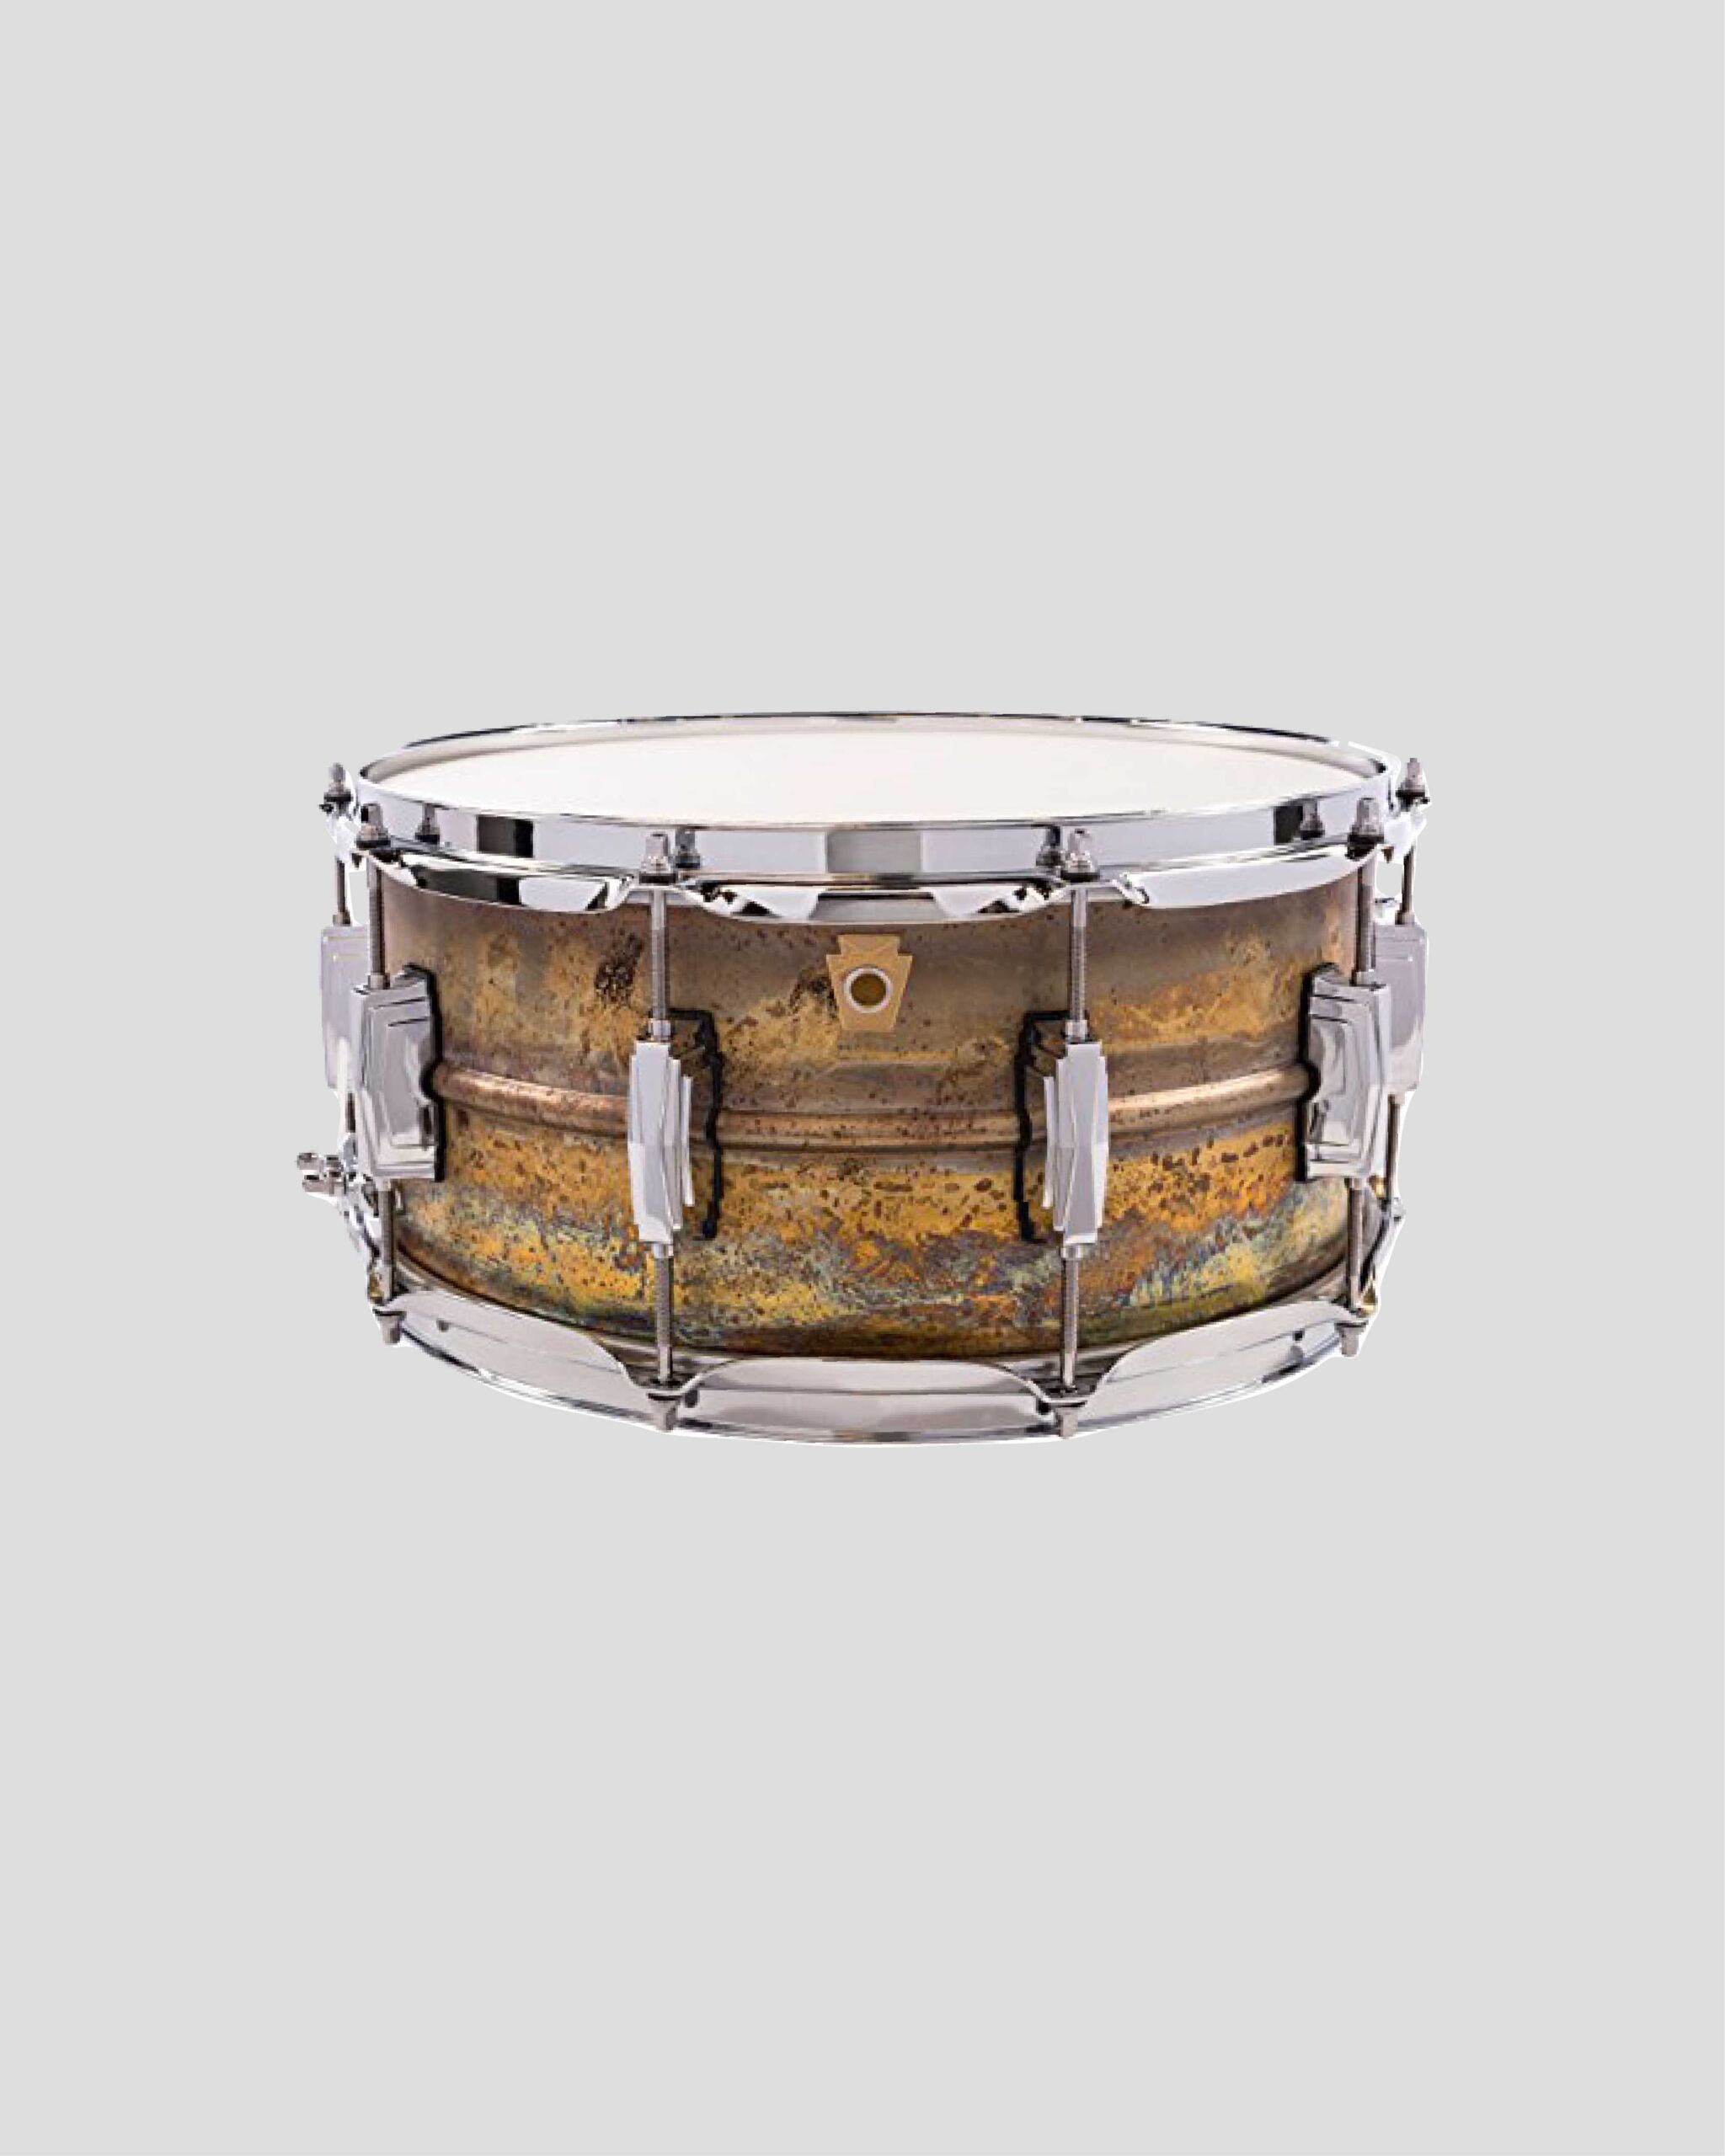 LUDWIG LB464R Raw Brass Phonic Snare